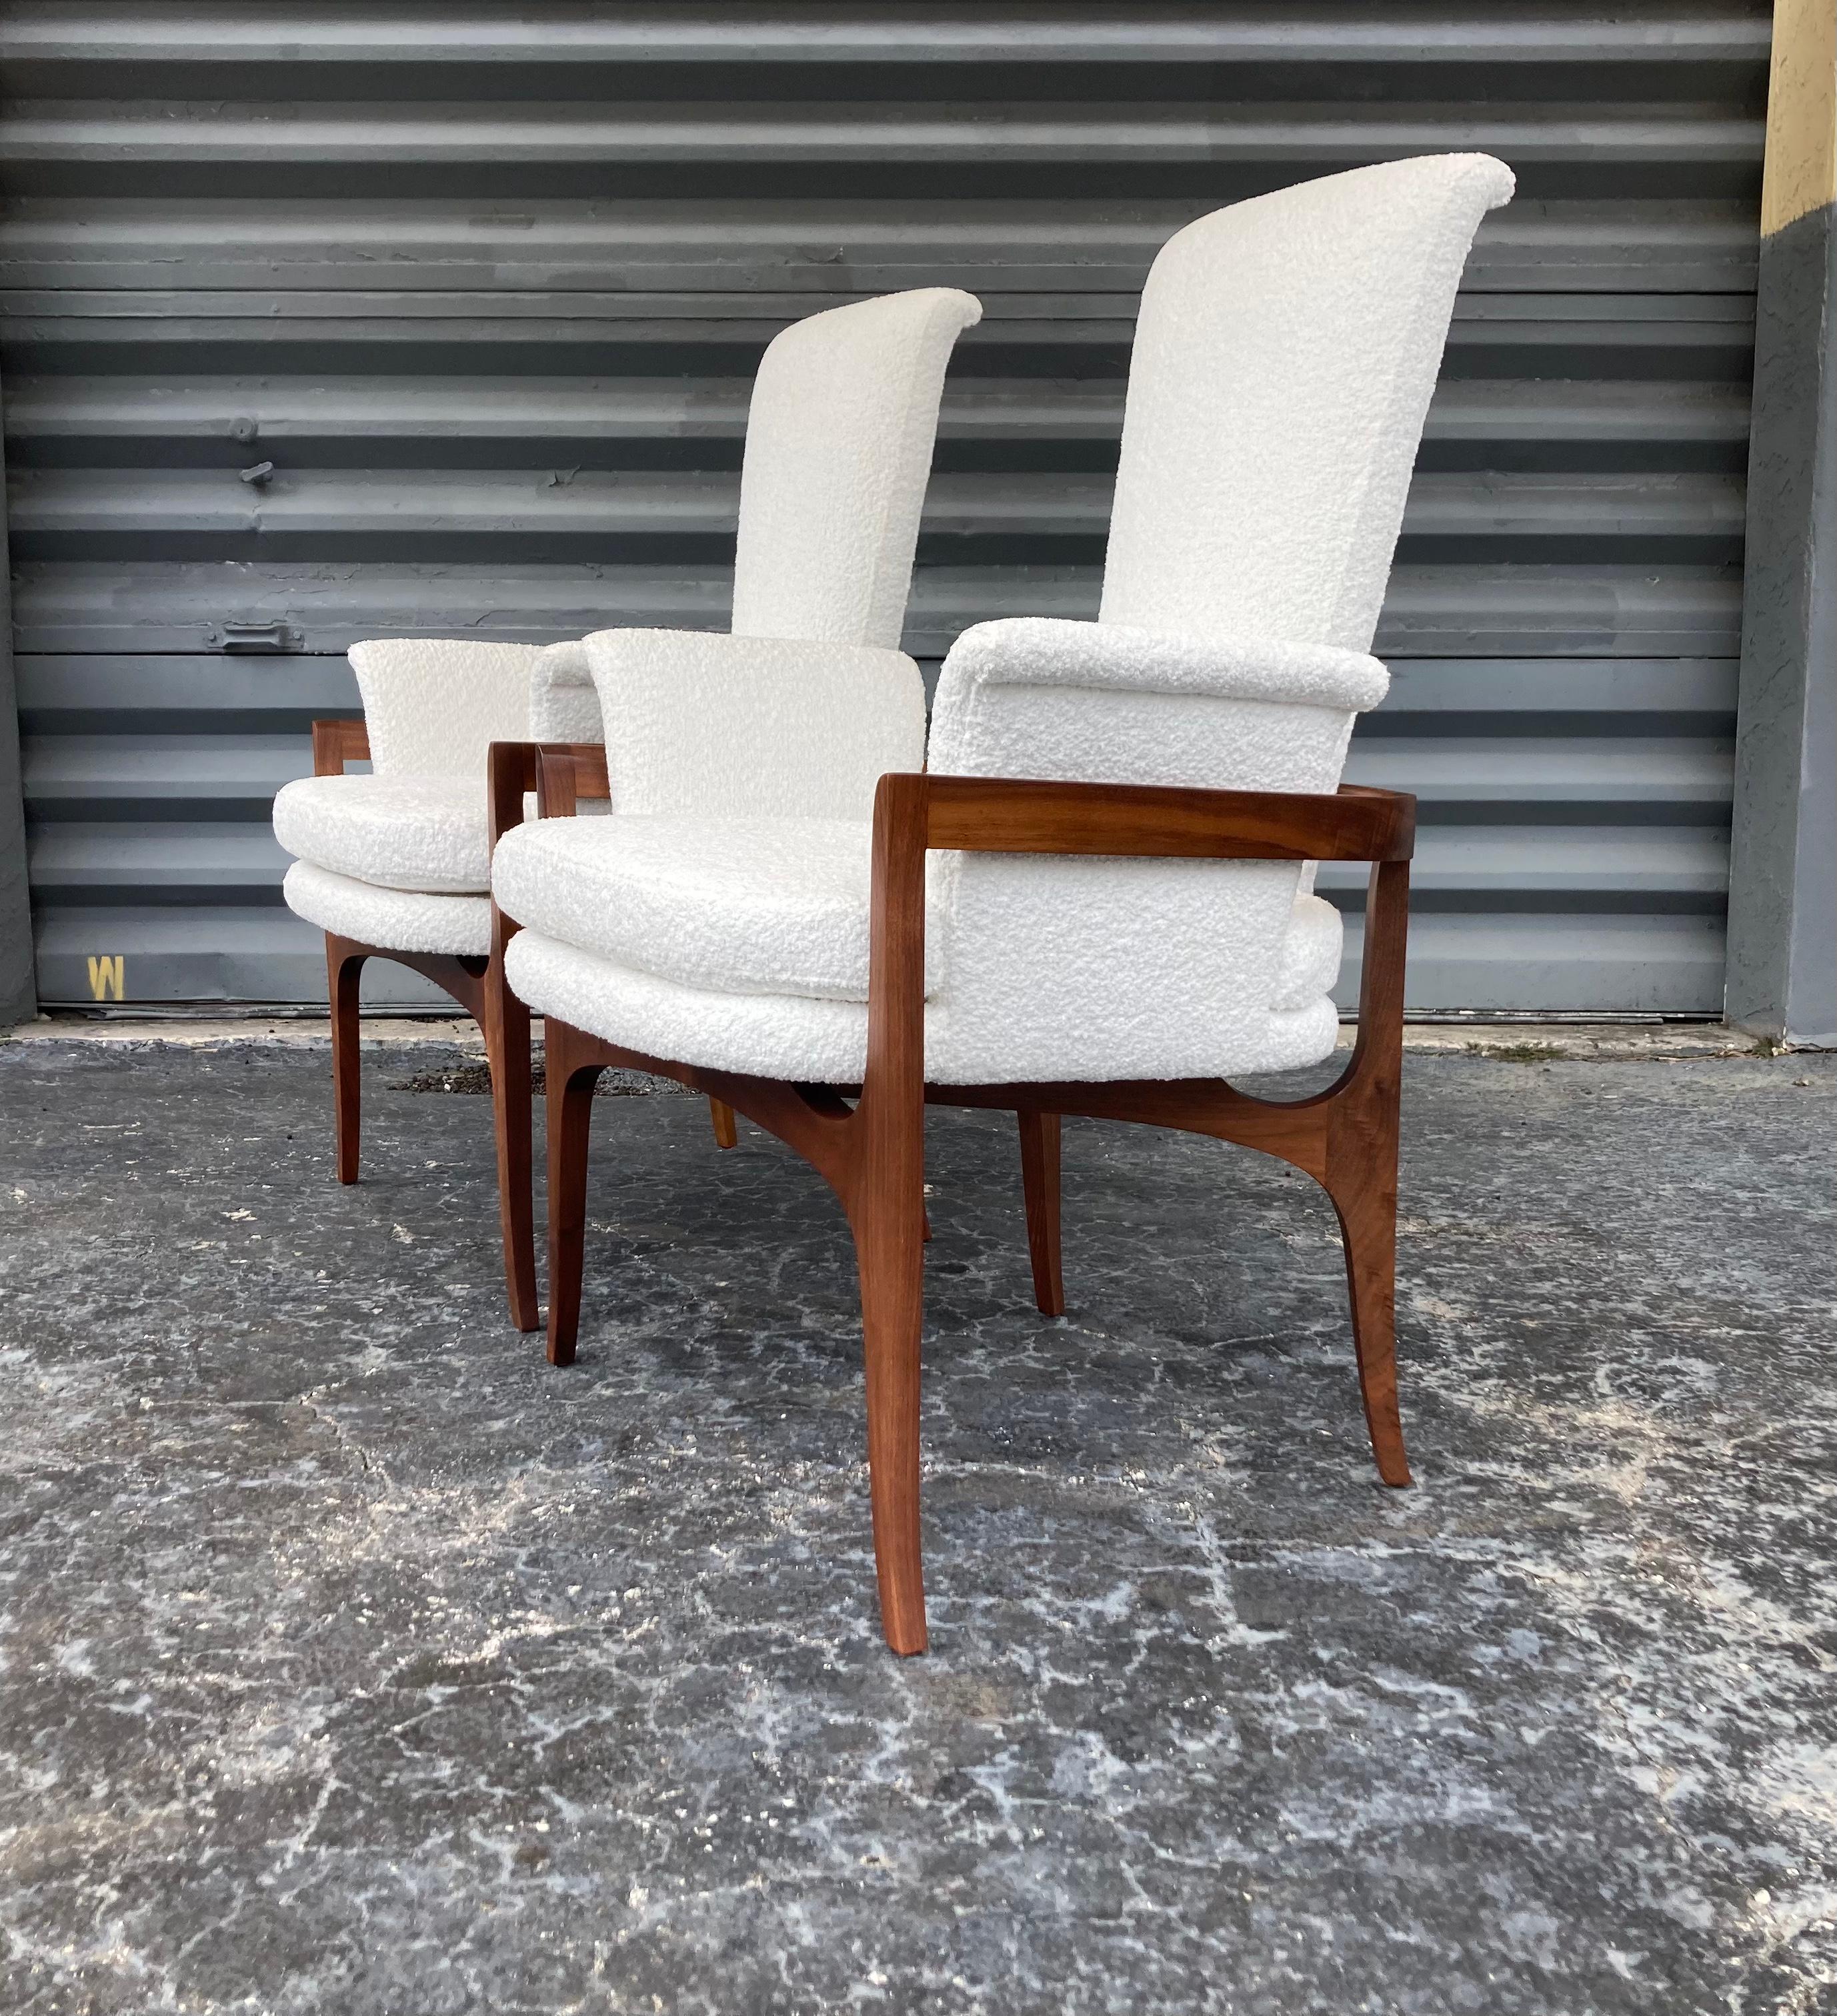 Mid-20th Century Sculptural Mid-Century Modern Lounge Chairs, Walnut and White Boucle Fabric For Sale